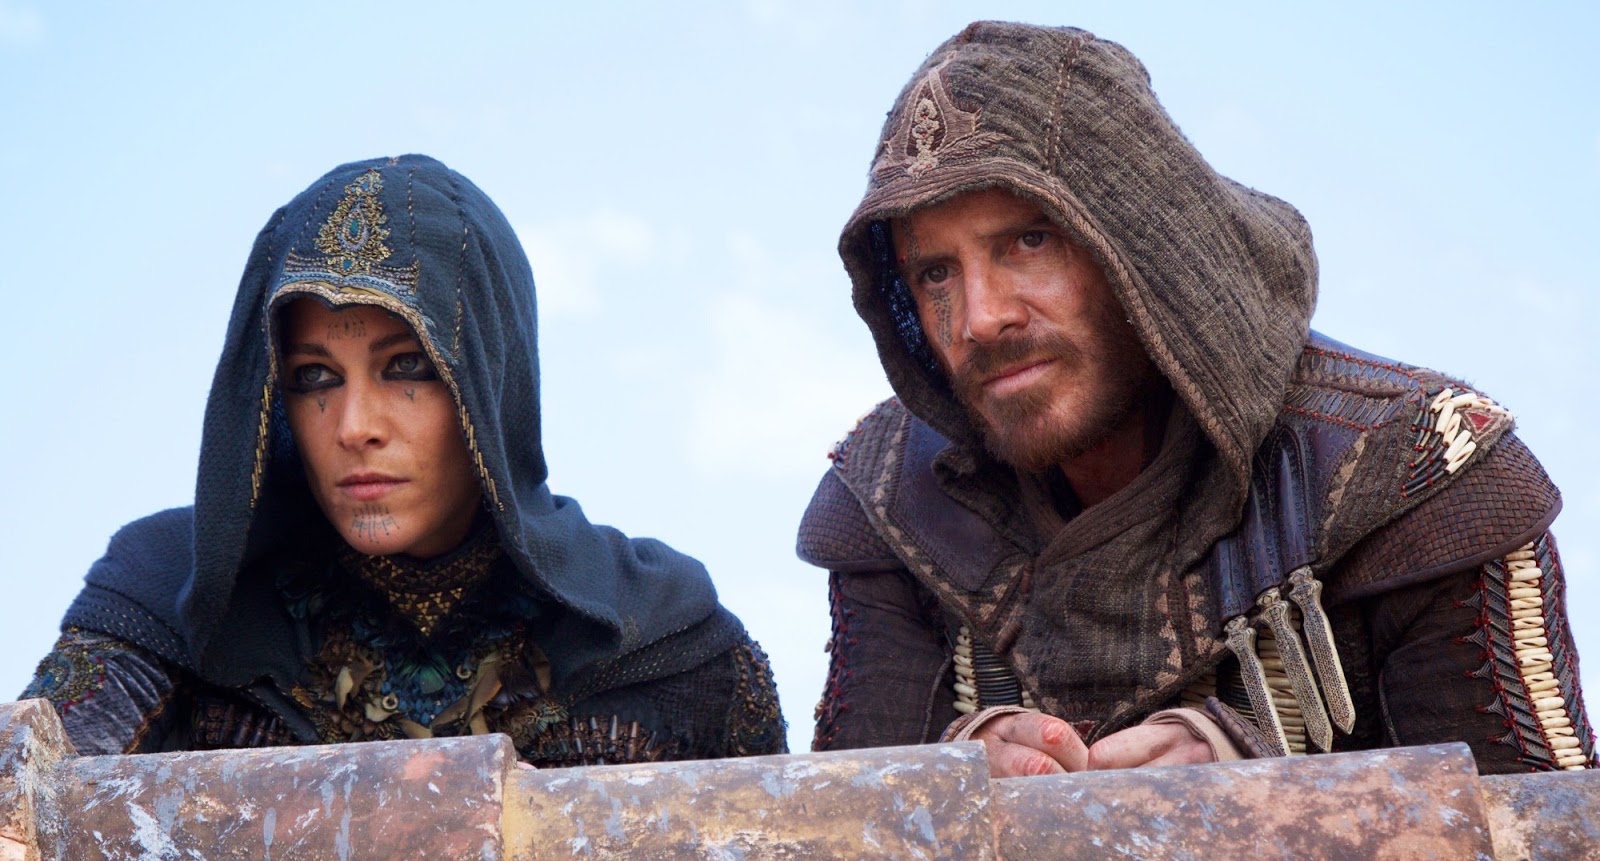 Assassin’s Creed (2016) – This film adaptation of the videogame stars Michael Fassbender